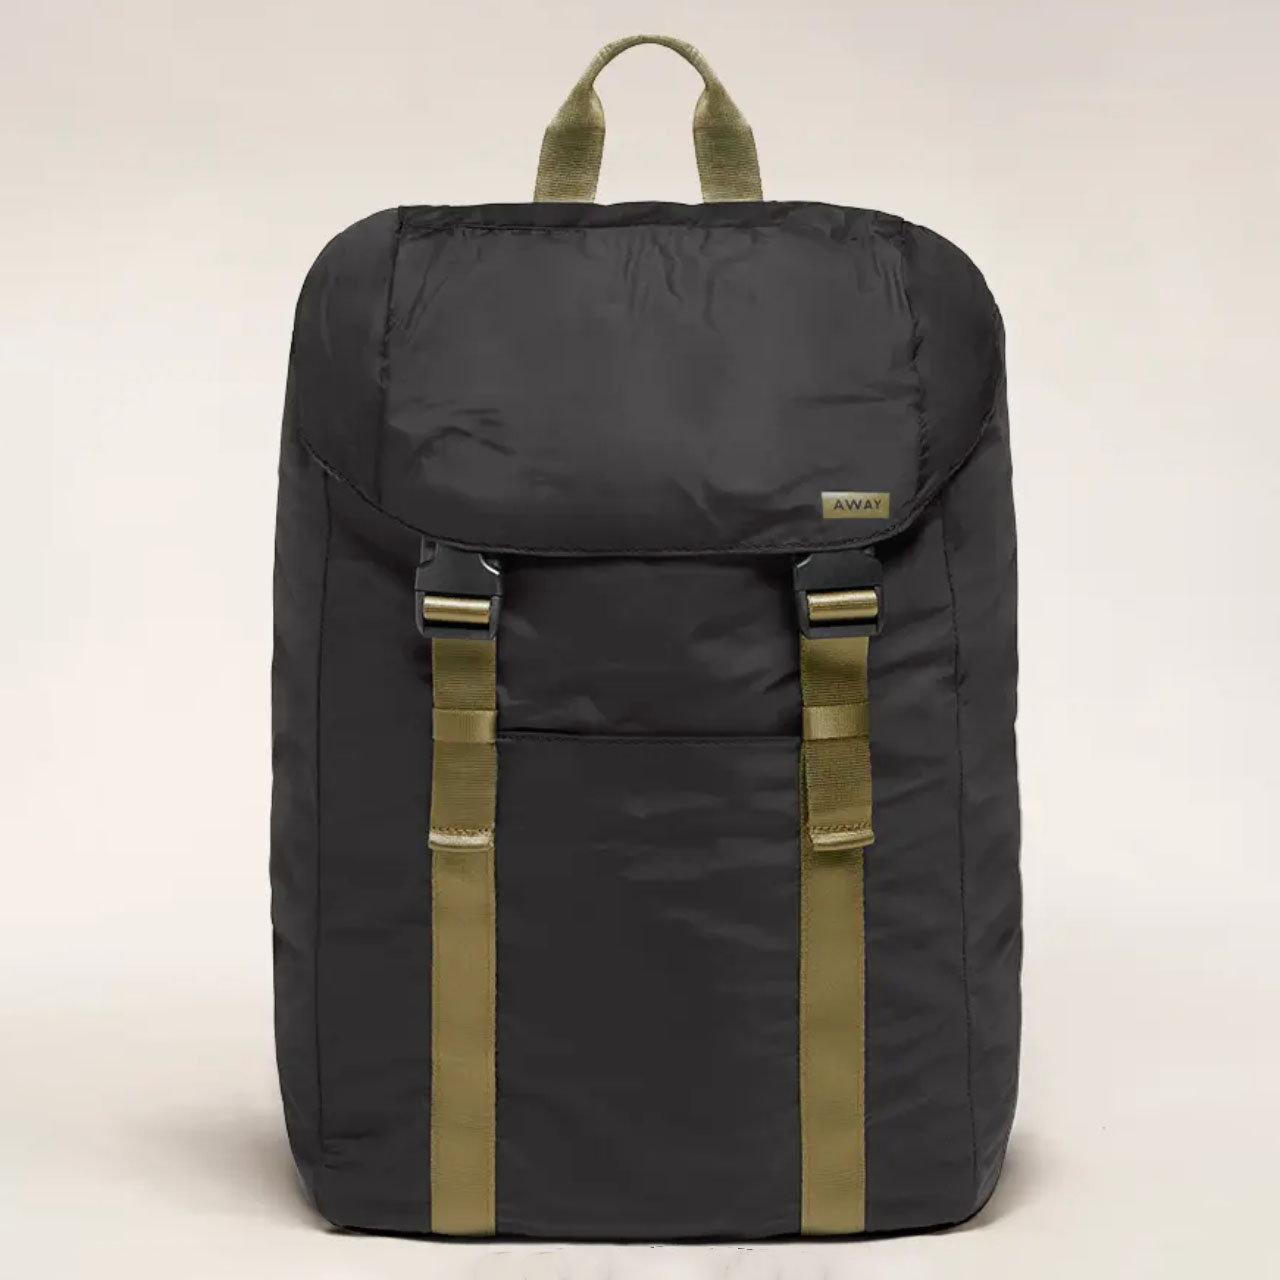 Grey backpack with dark green trims